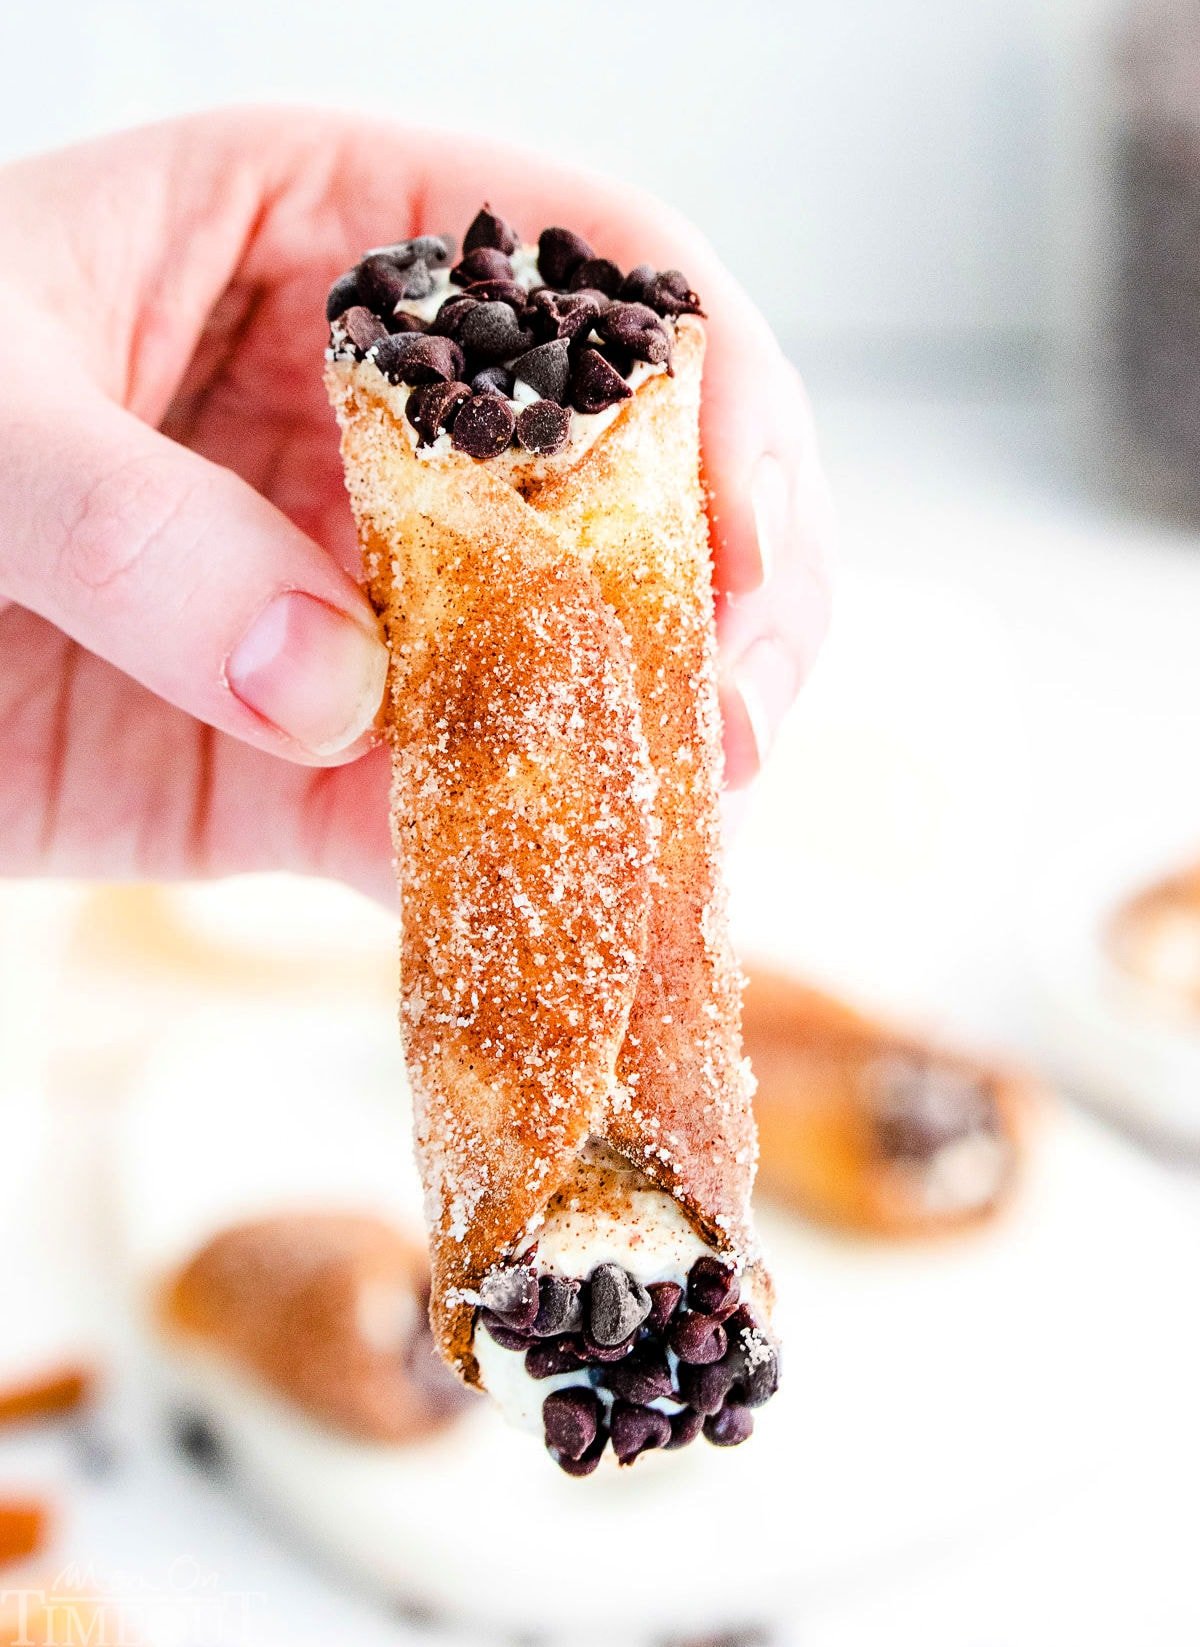 cannoli with mini chocolate chips at either end being held up over a white plate.